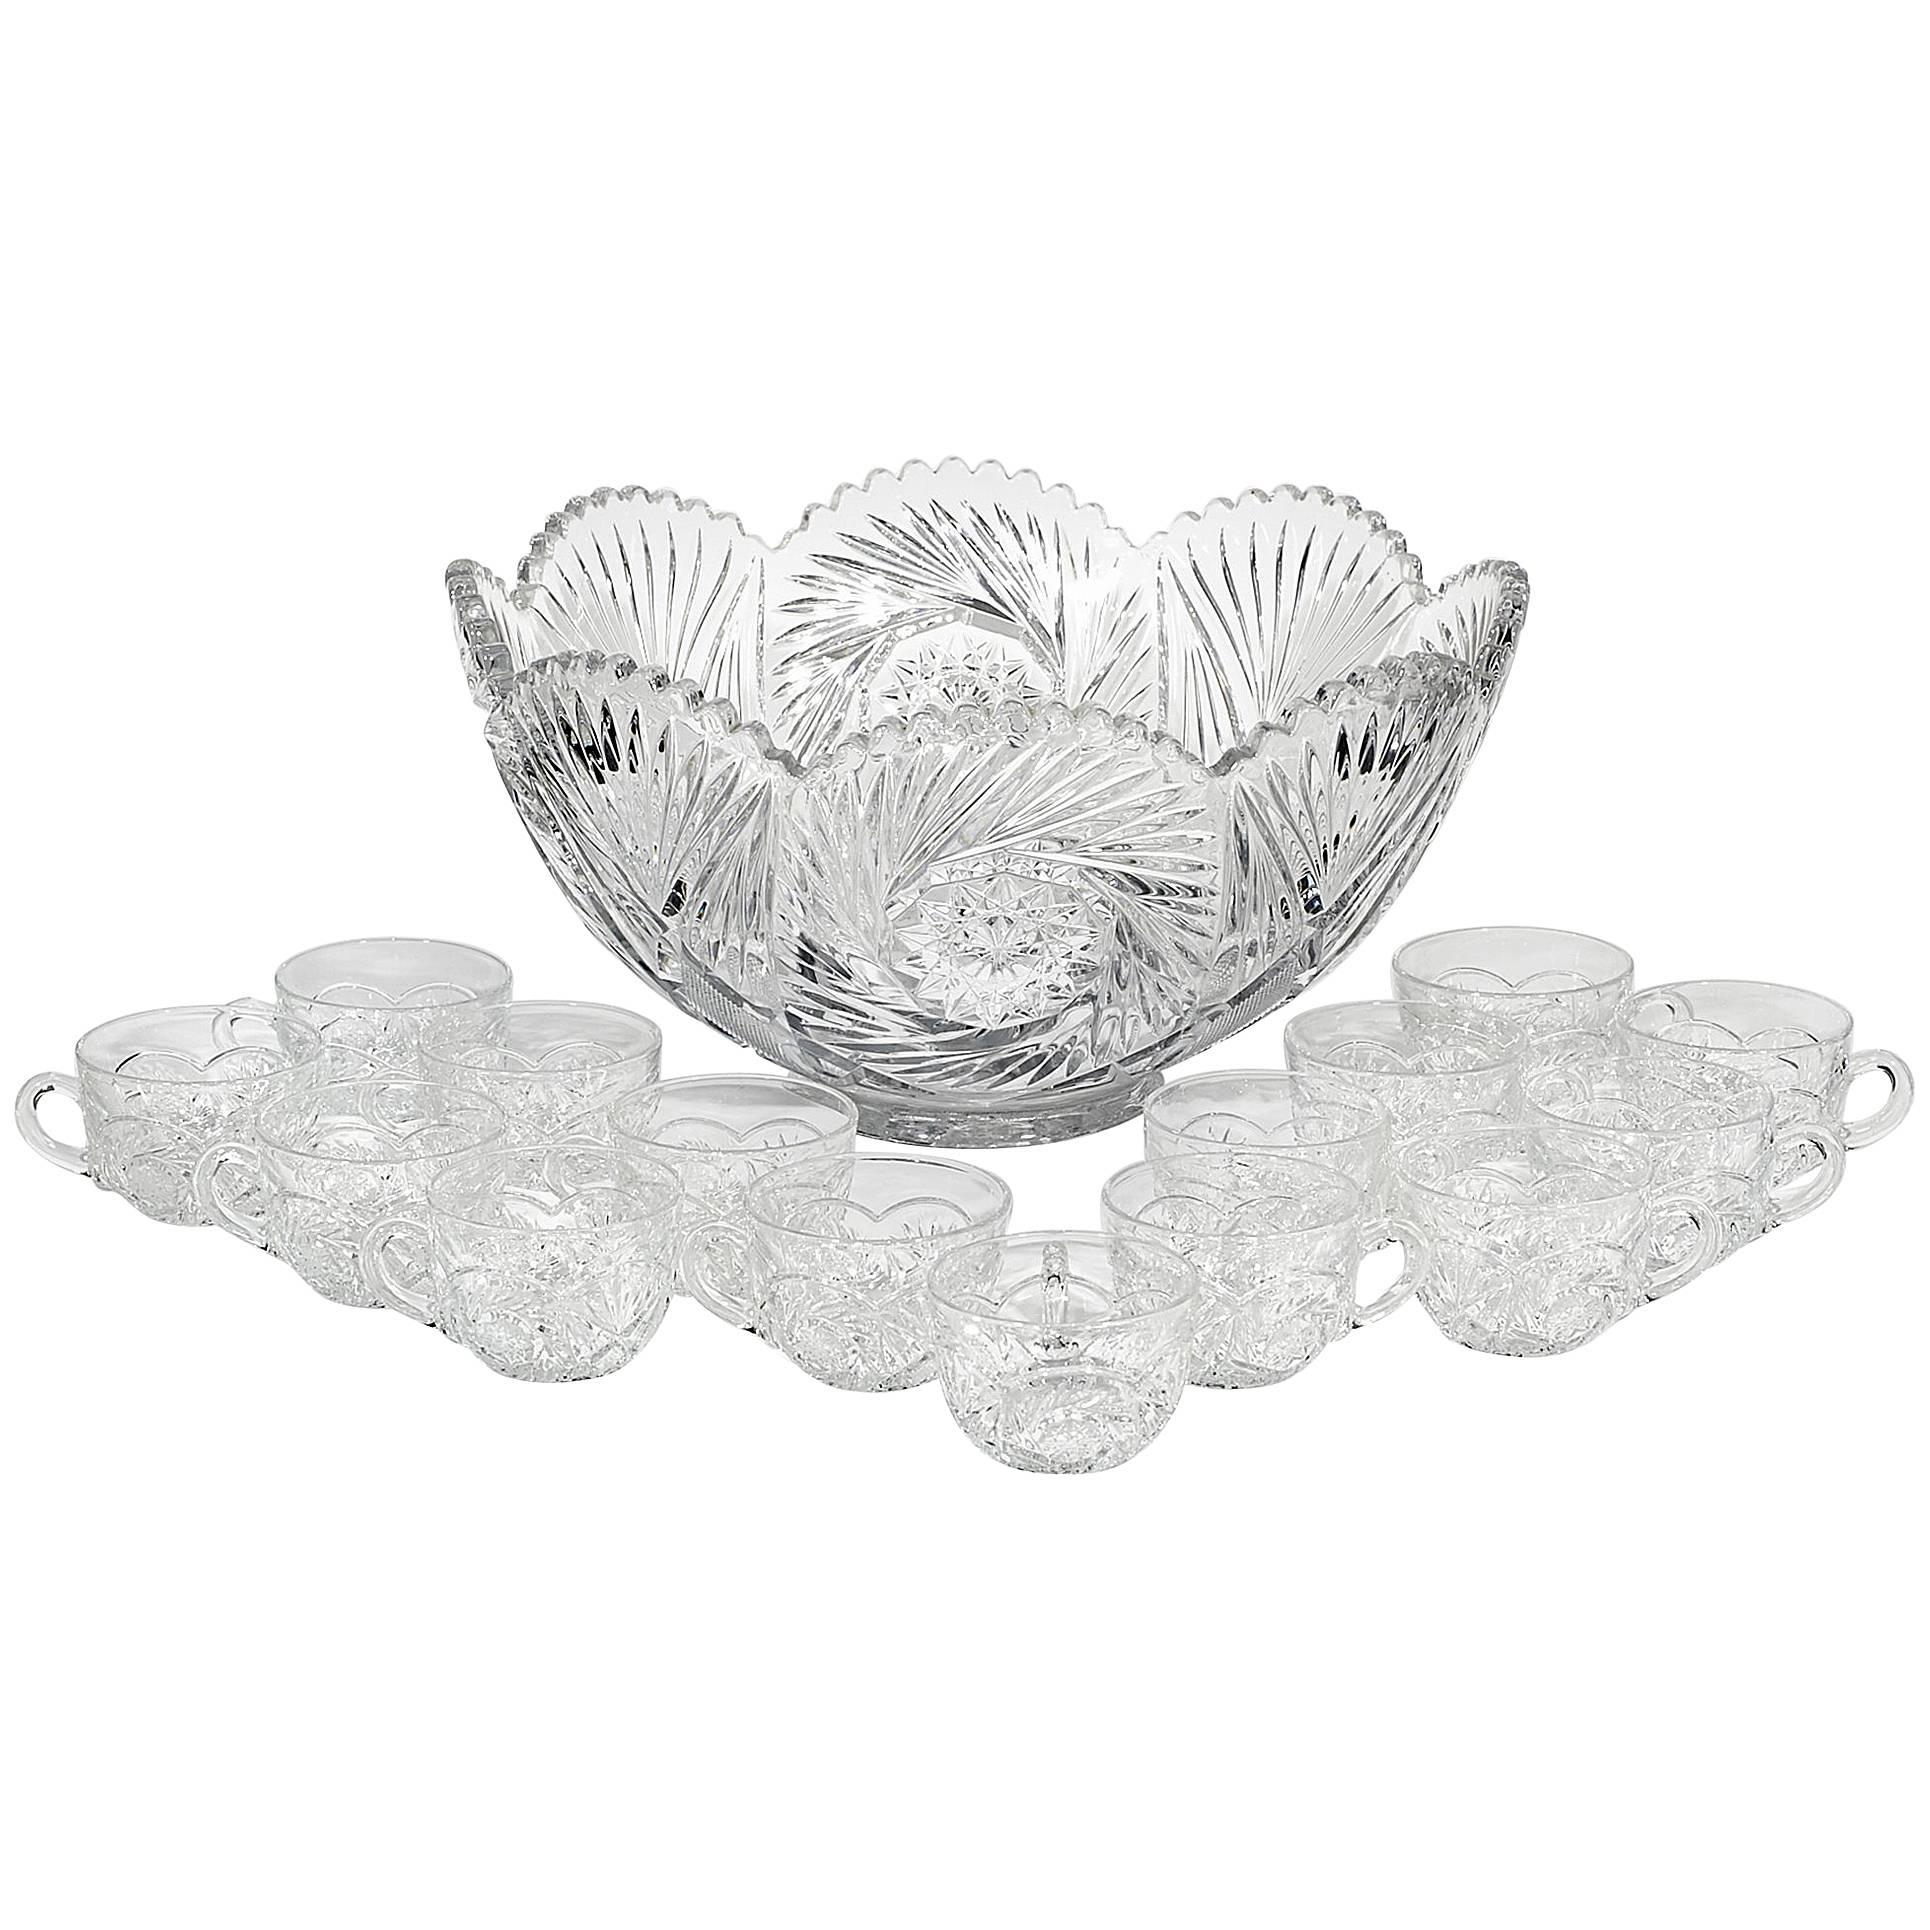 Heisey Glass Co. Glass Punch Bowl Set, 16 Pieces